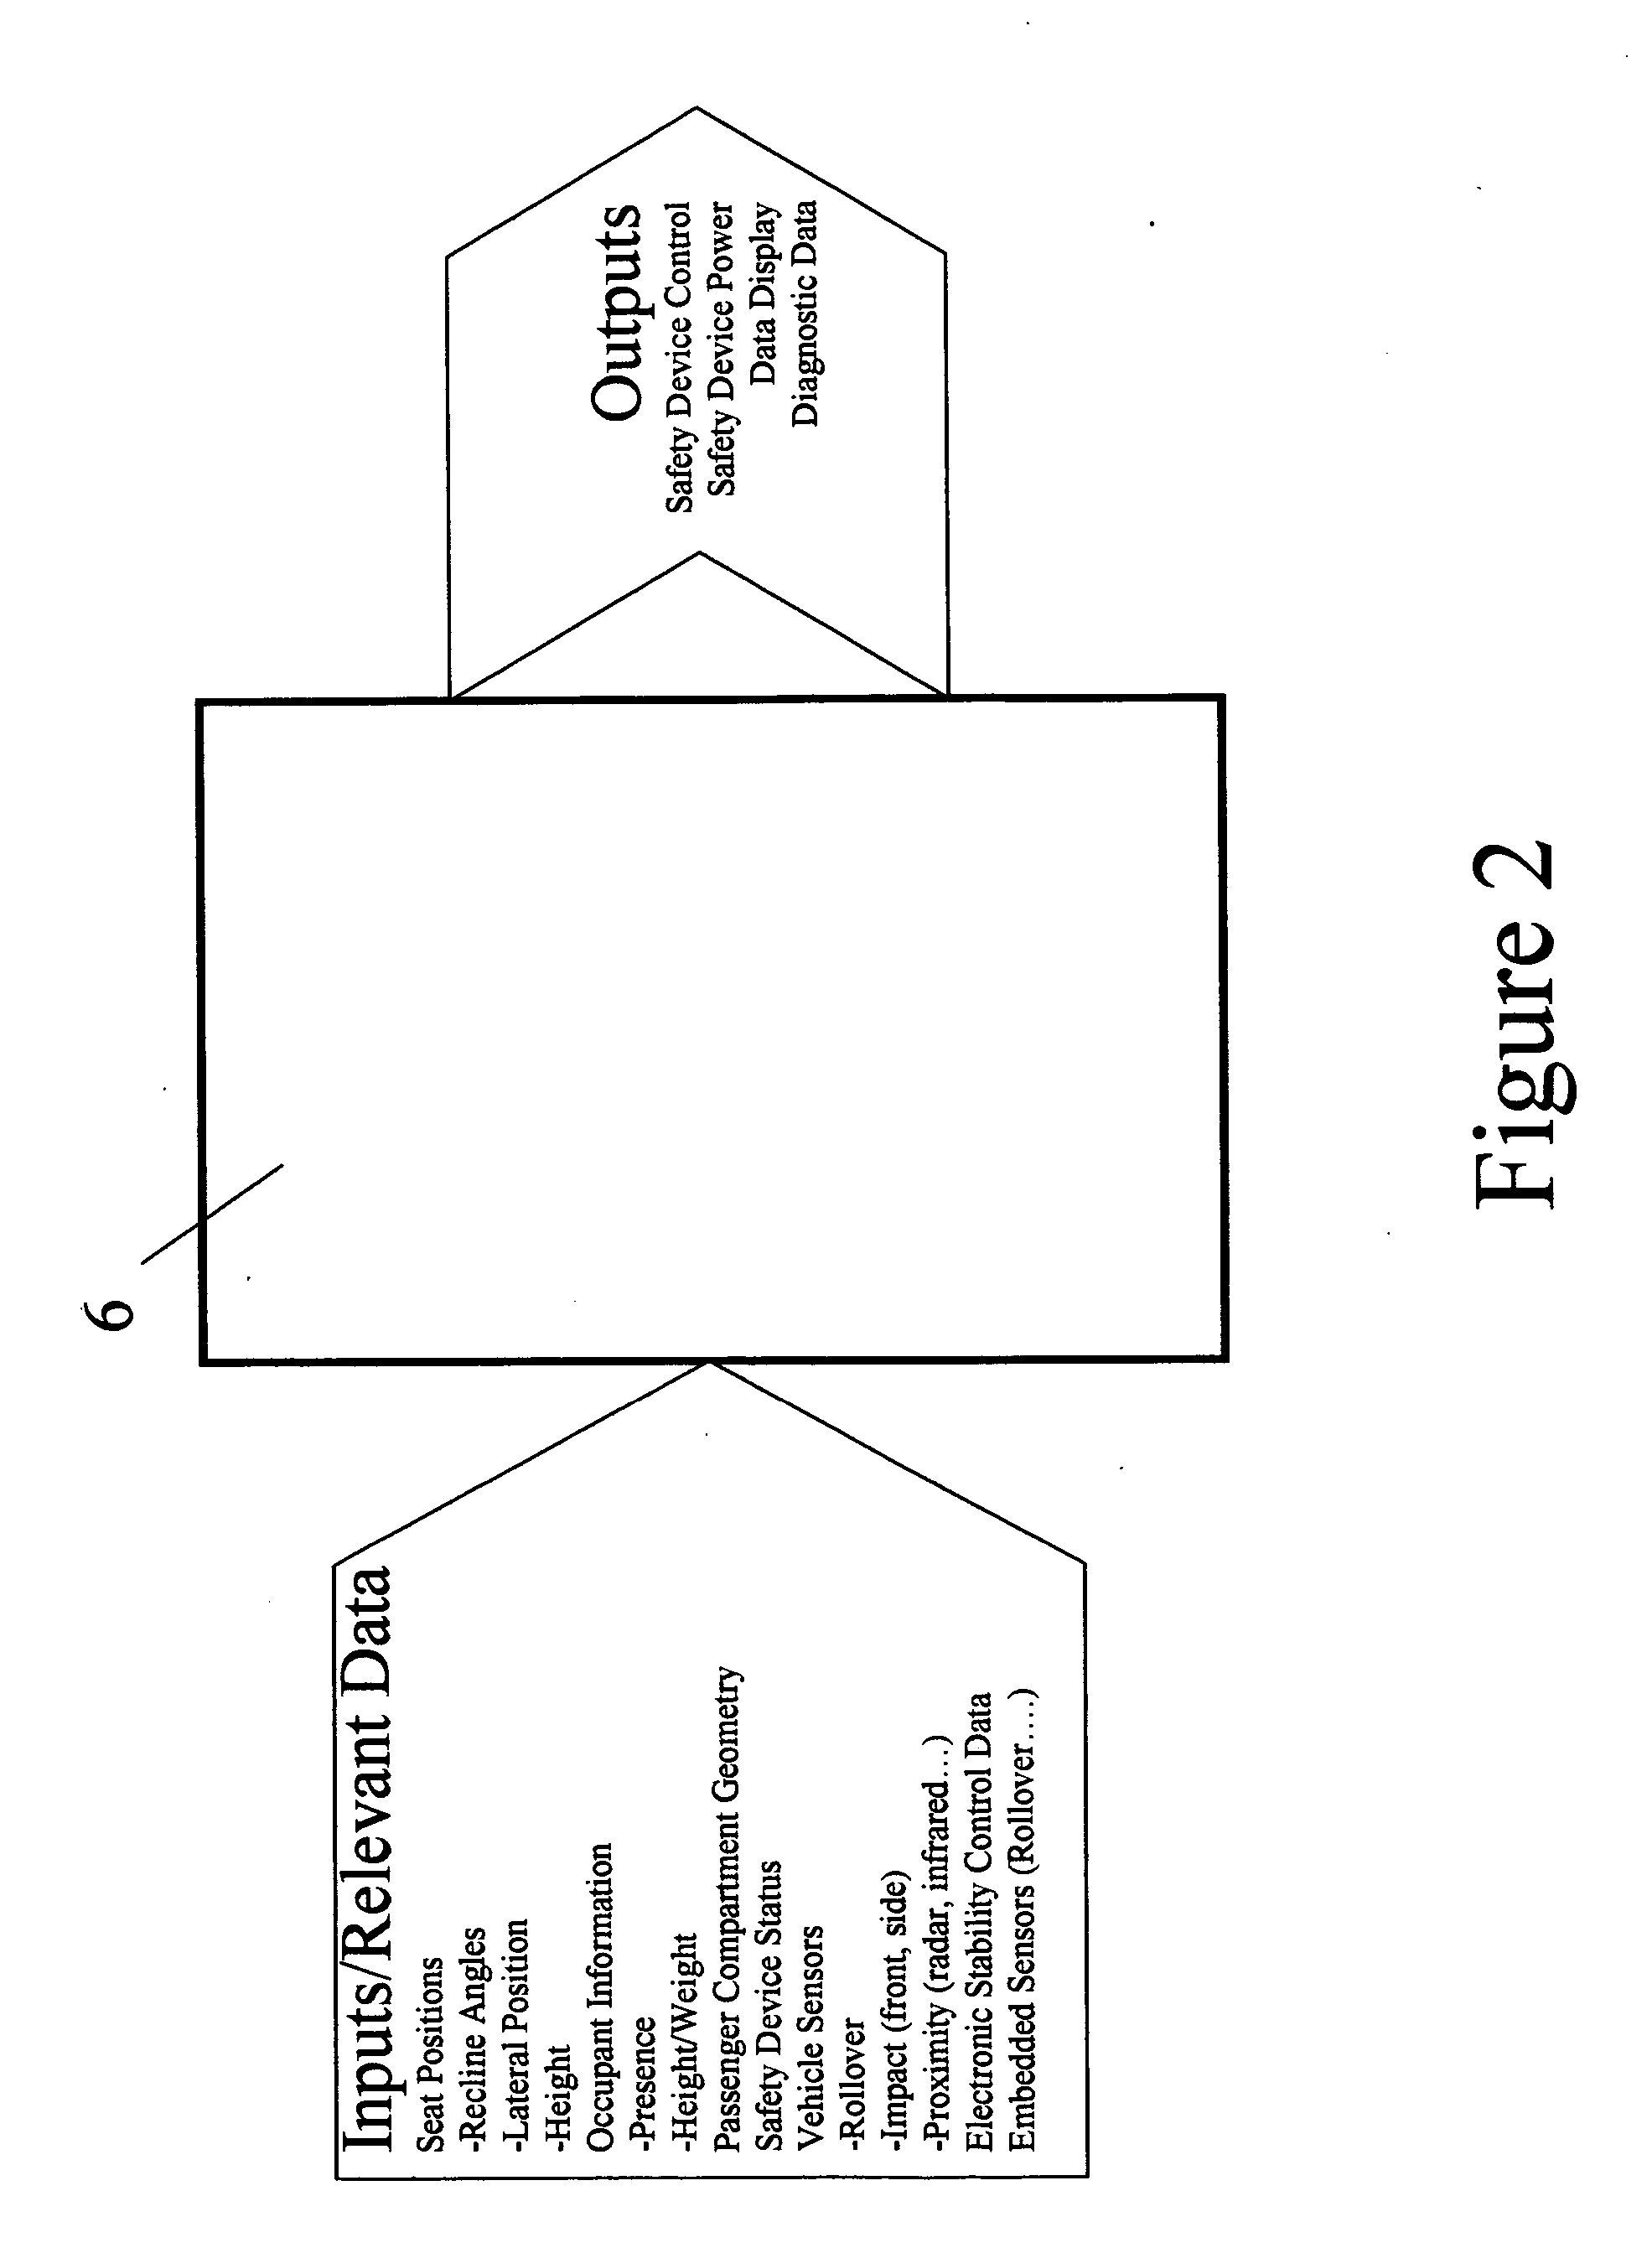 Vehicle safety control system